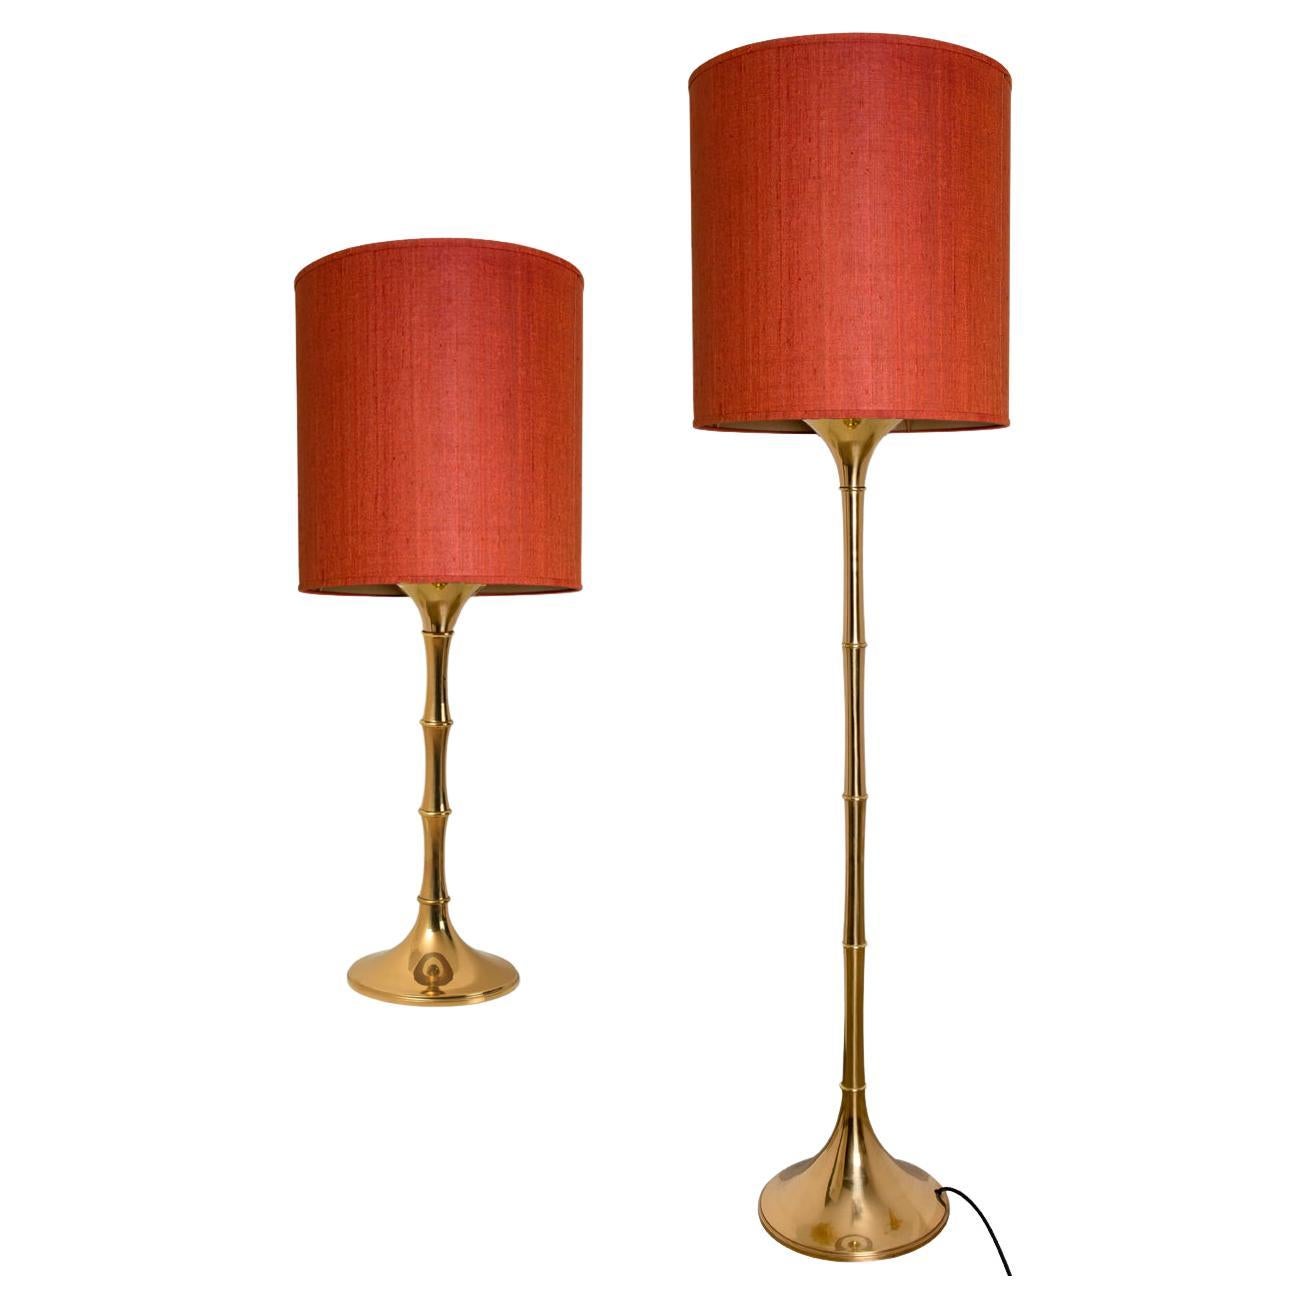 Pair of Table and Floor Lamp Designed by Ingo Maurer, 1968